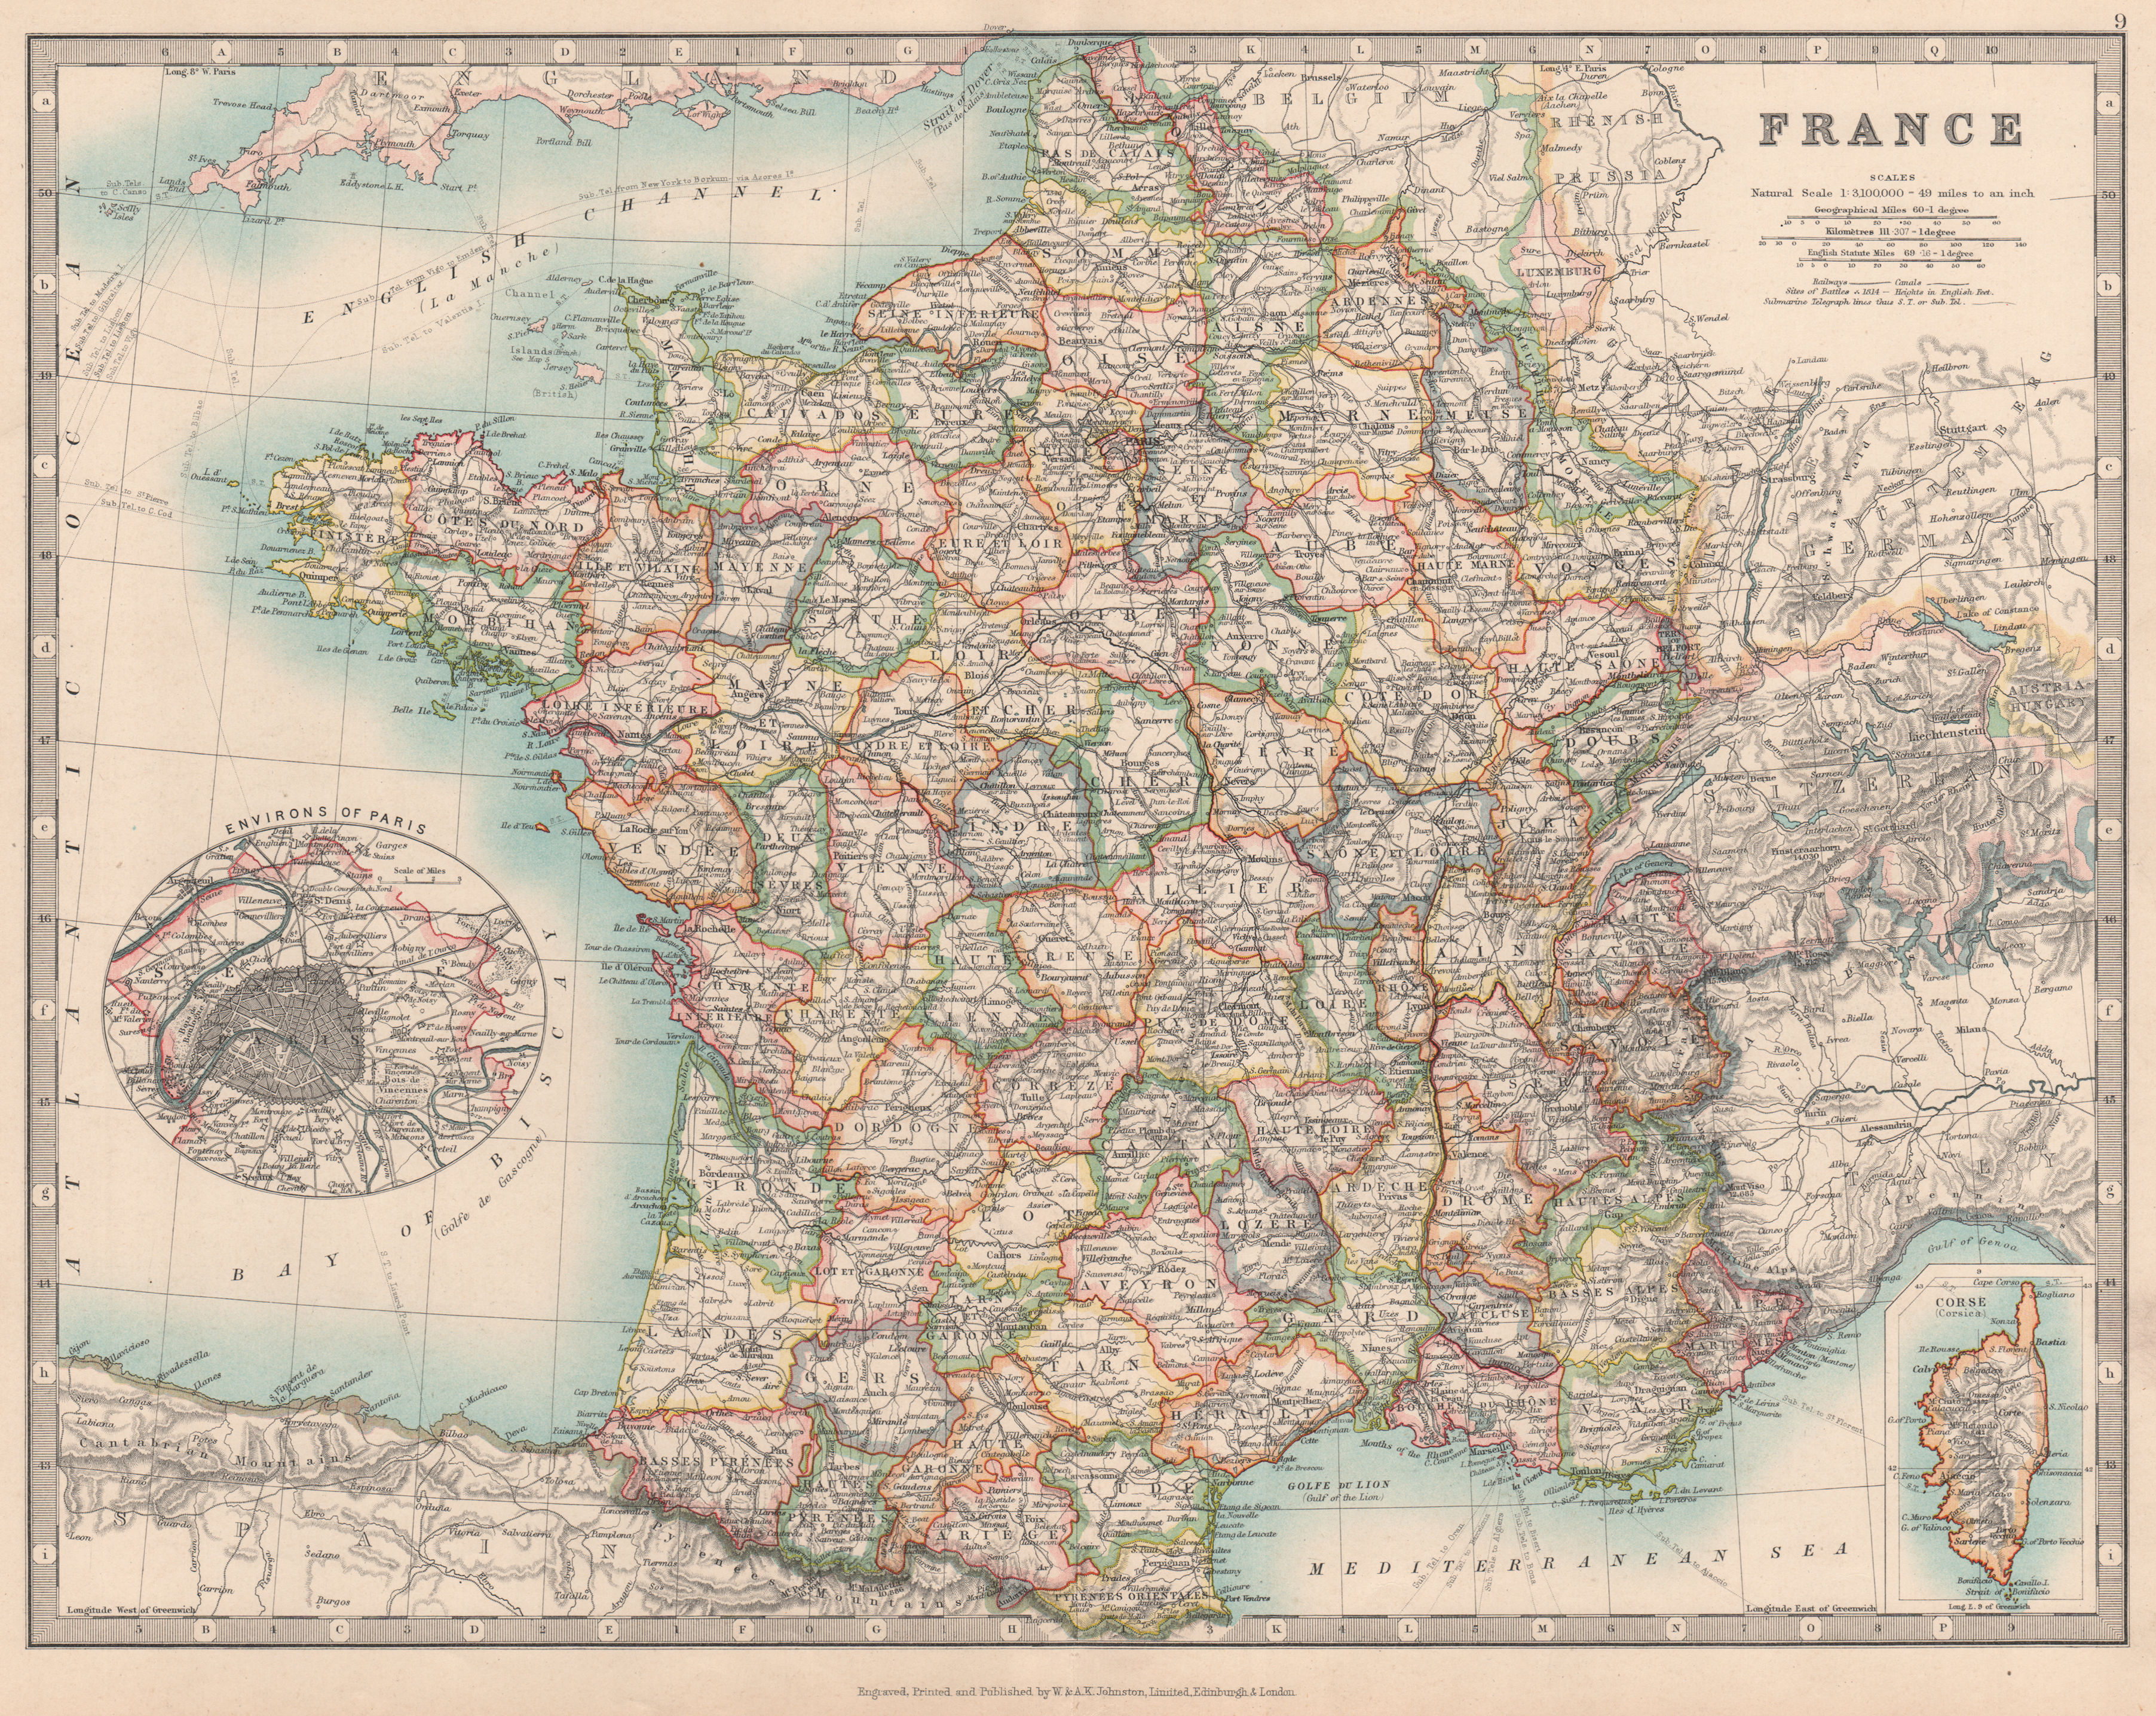 Associate Product FRANCE showing important battlefields and dates. JOHNSTON 1912 old antique map